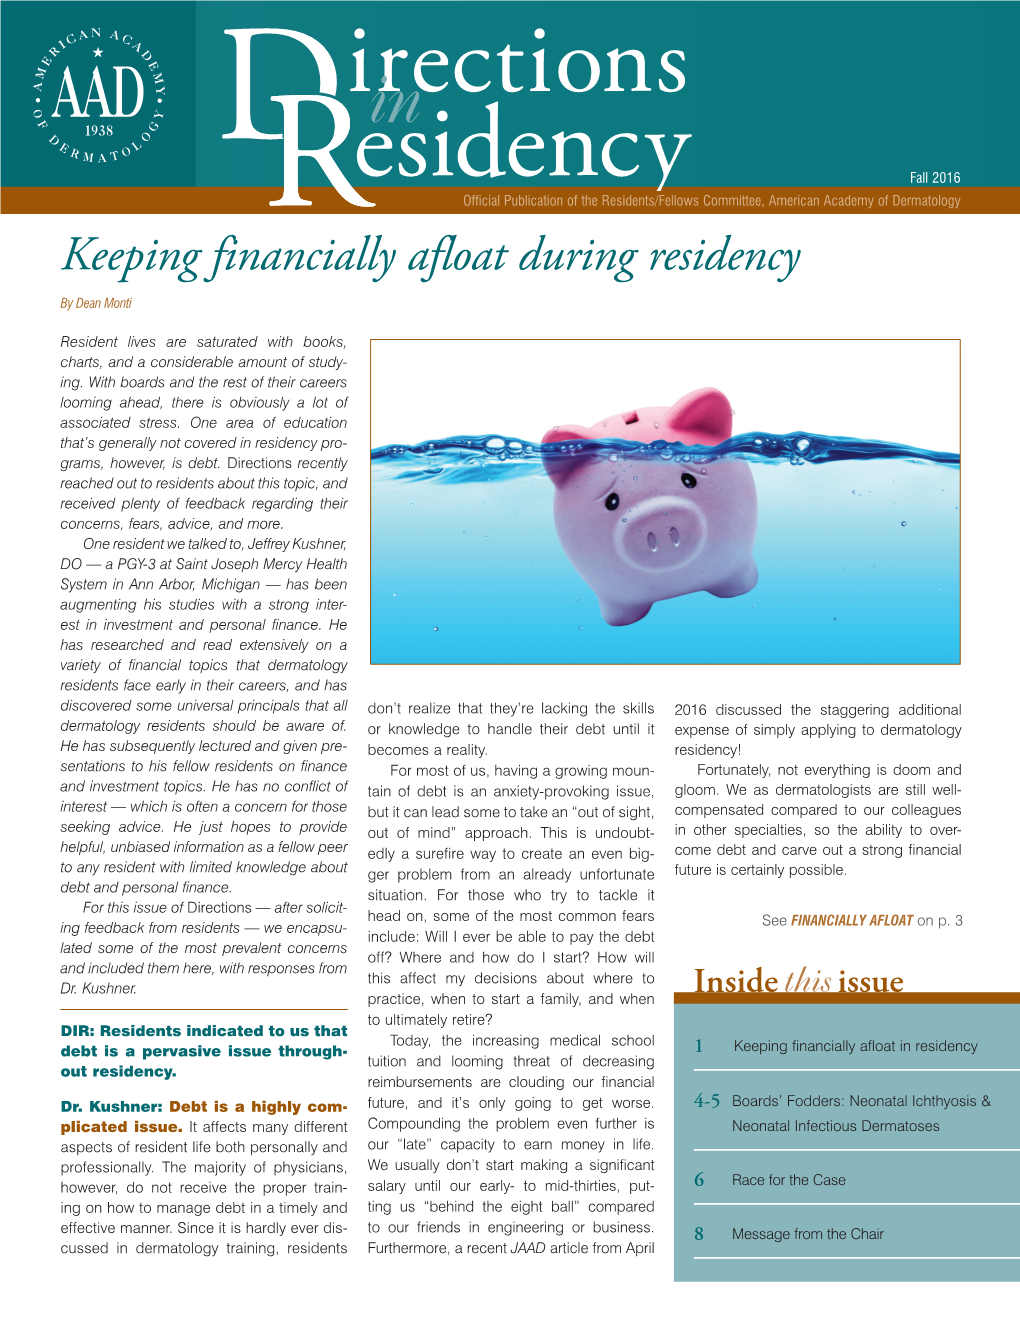 Esidencyofficial Publication of the Residents/Fellows Committee, American Academy of Dermatology Keeping Financially Afloat During Residency by Dean Monti